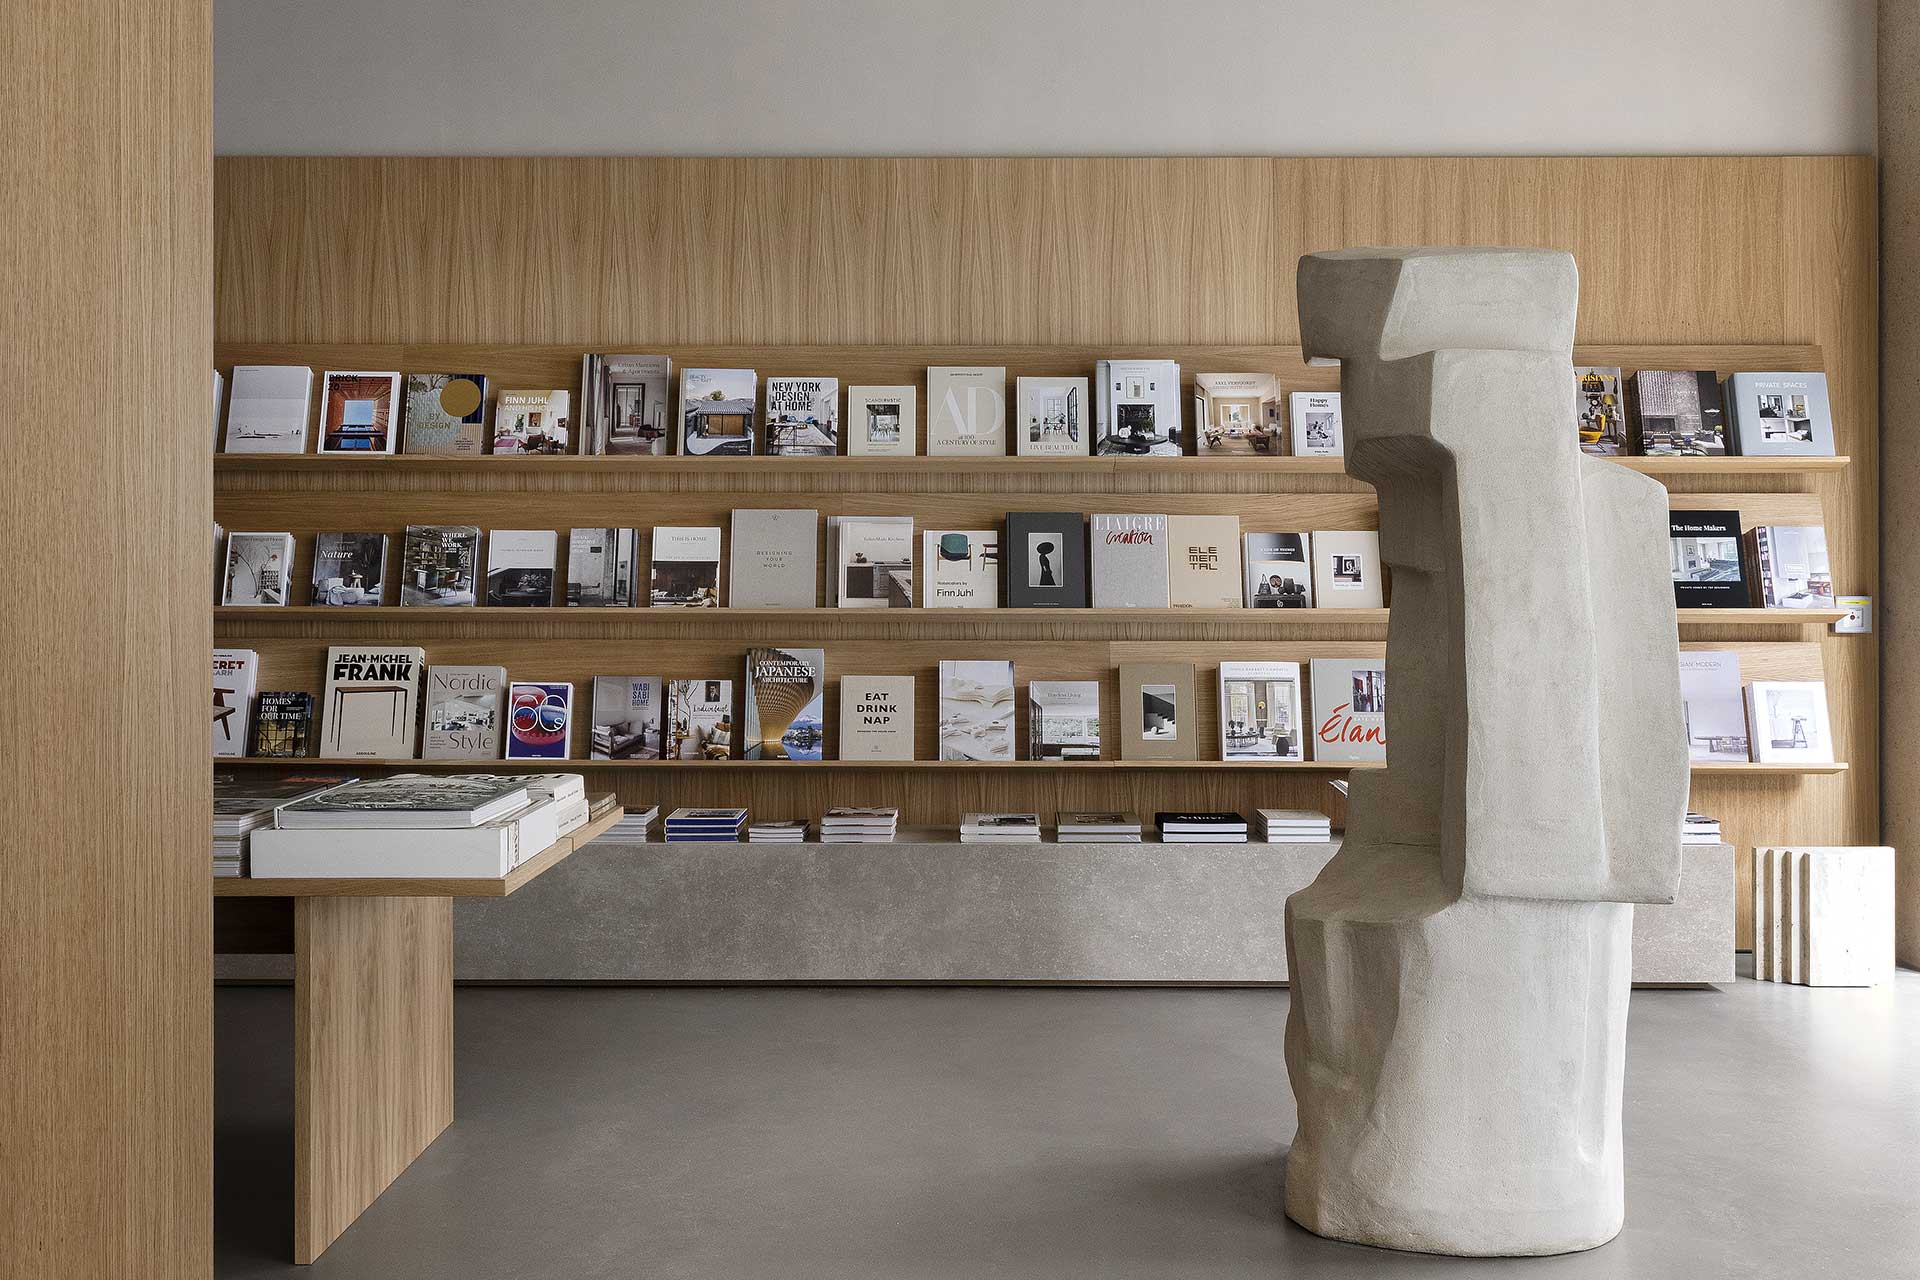 New Mags is a concept bookstore in Copenhagen where design and furniture meet books